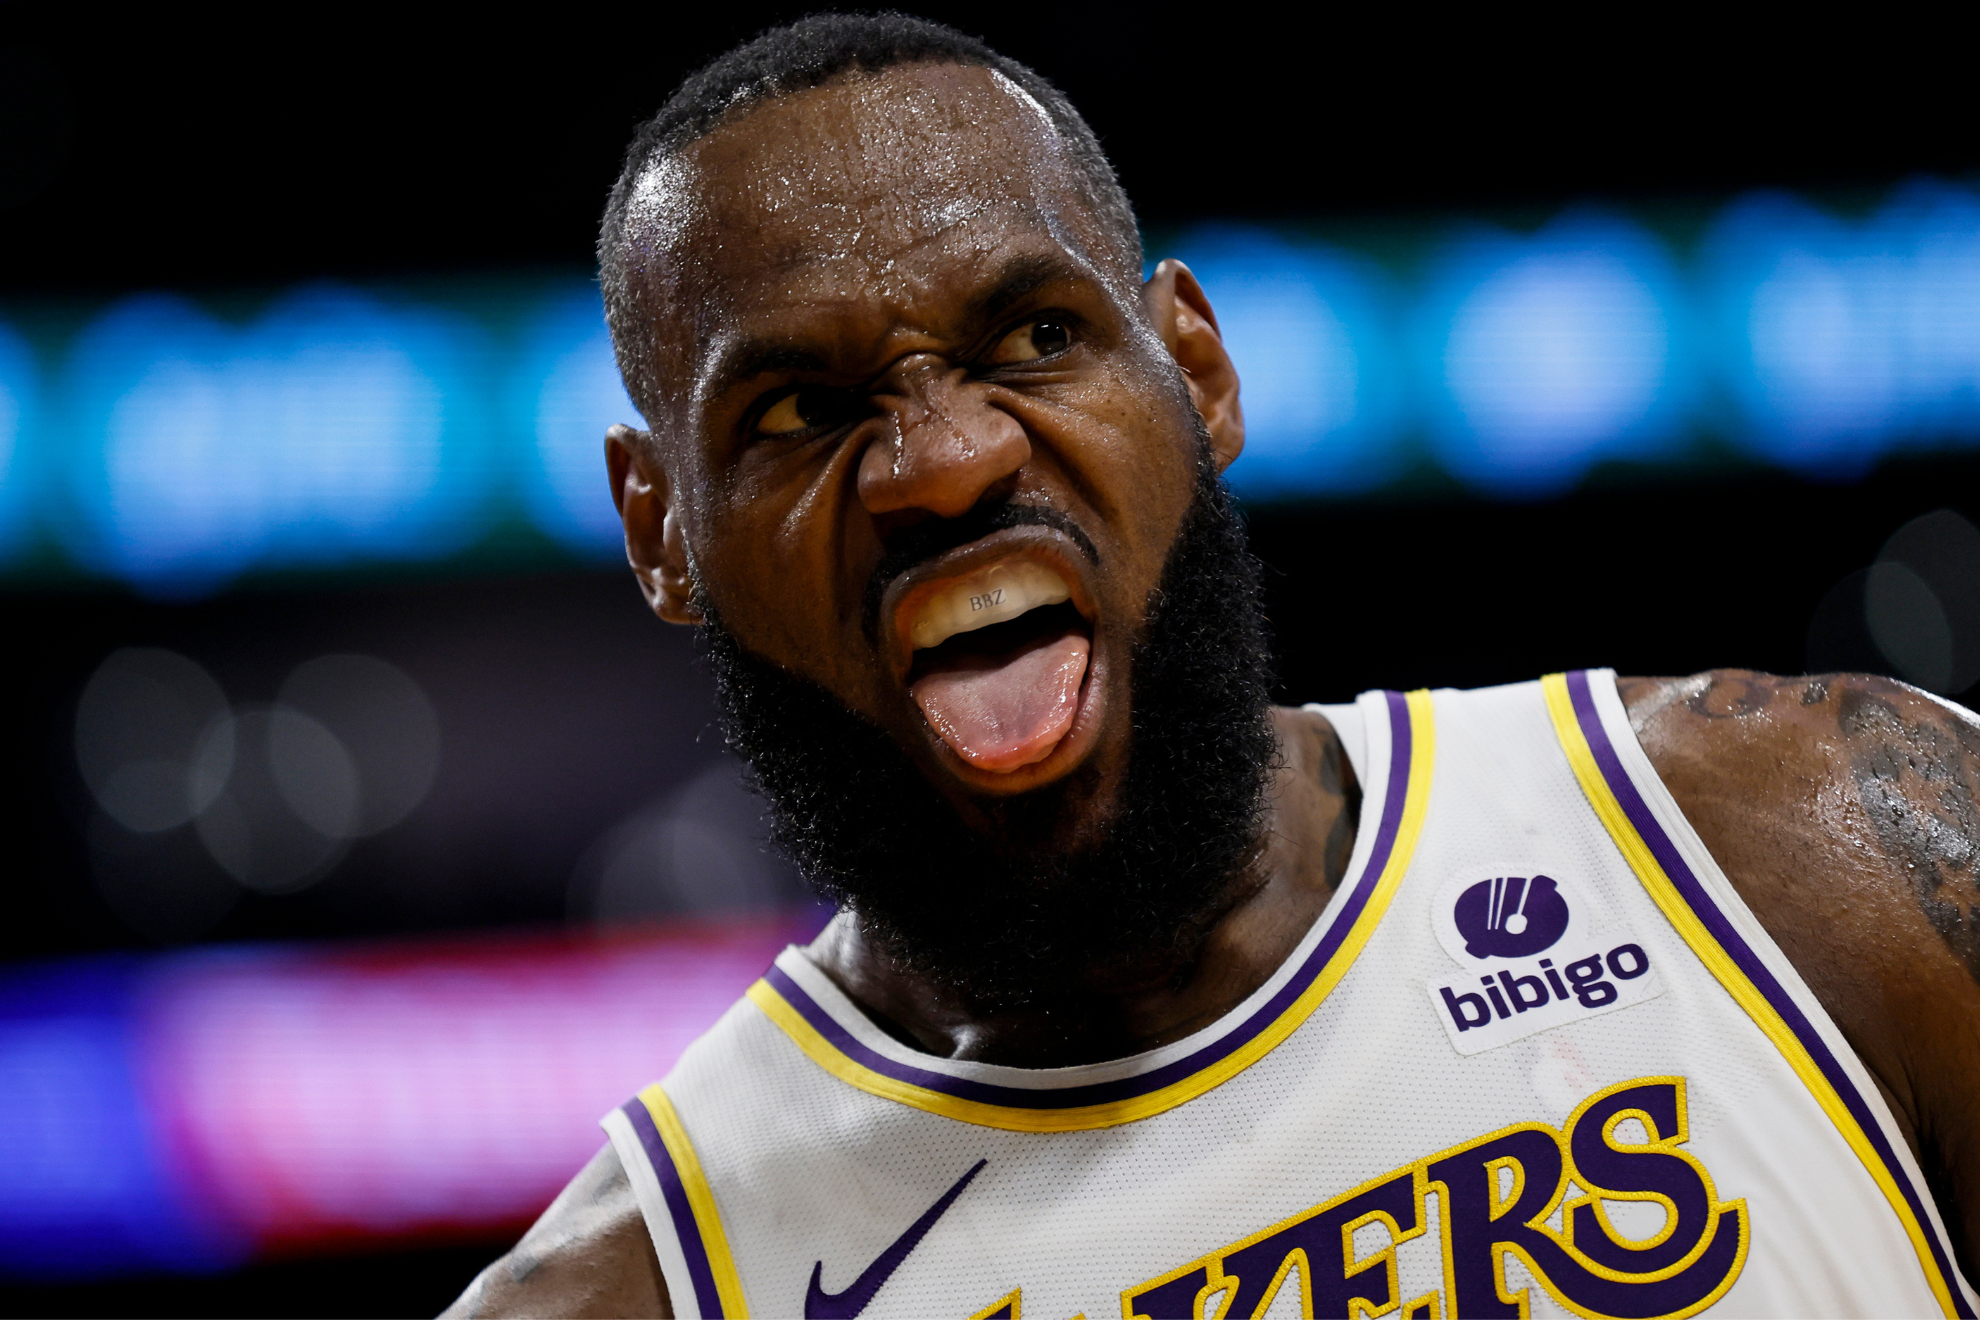 LeBron James friend hints at career change as NBA star launches new business